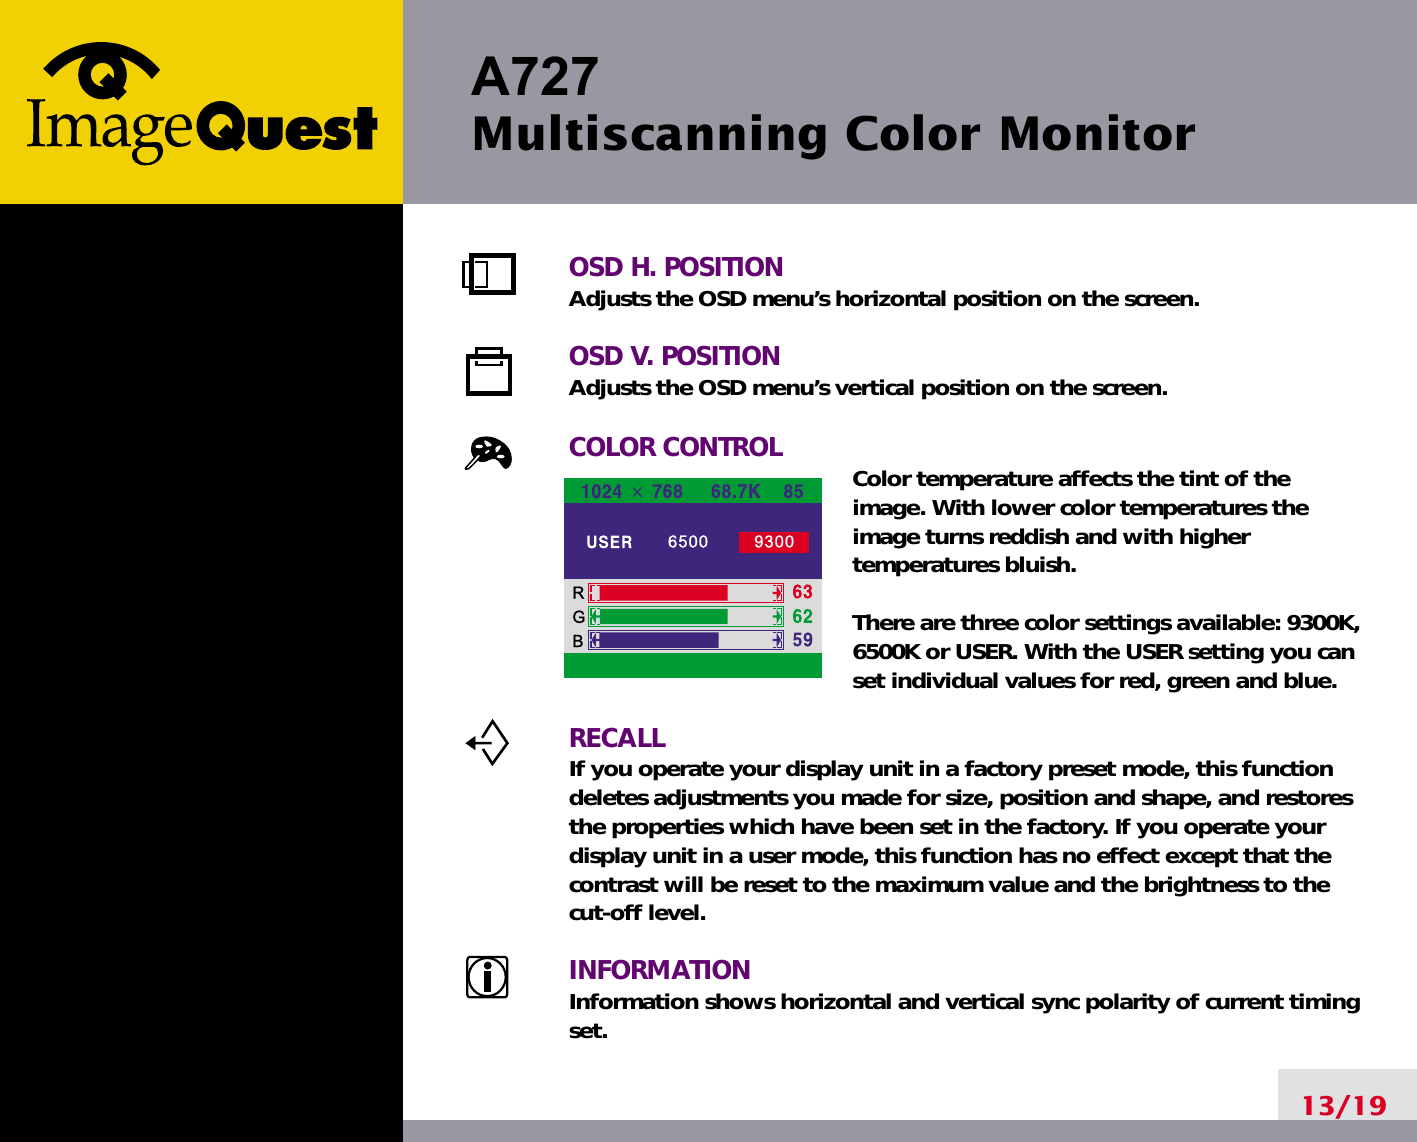 A727 Multiscanning Color Monitor13/19OSD H. POSITIONAdjusts the OSD menu’s horizontal position on the screen.OSD V. POSITIONAdjusts the OSD menu’s vertical position on the screen.COLOR CONTROL Color temperature affects the tint of theimage. With lower color temperatures theimage turns reddish and with highertemperatures bluish.There are three color settings available: 9300K,6500K or USER. With the USER setting you canset individual values for red, green and blue.RECALLIf you operate your display unit in a factory preset mode, this functiondeletes adjustments you made for size, position and shape, and restoresthe properties which have been set in the factory. If you operate yourdisplay unit in a user mode, this function has no effect except that thecontrast will be reset to the maximum value and the brightness to thecut-off level.INFORMATIONInformation shows horizontal and vertical sync polarity of current timingset.